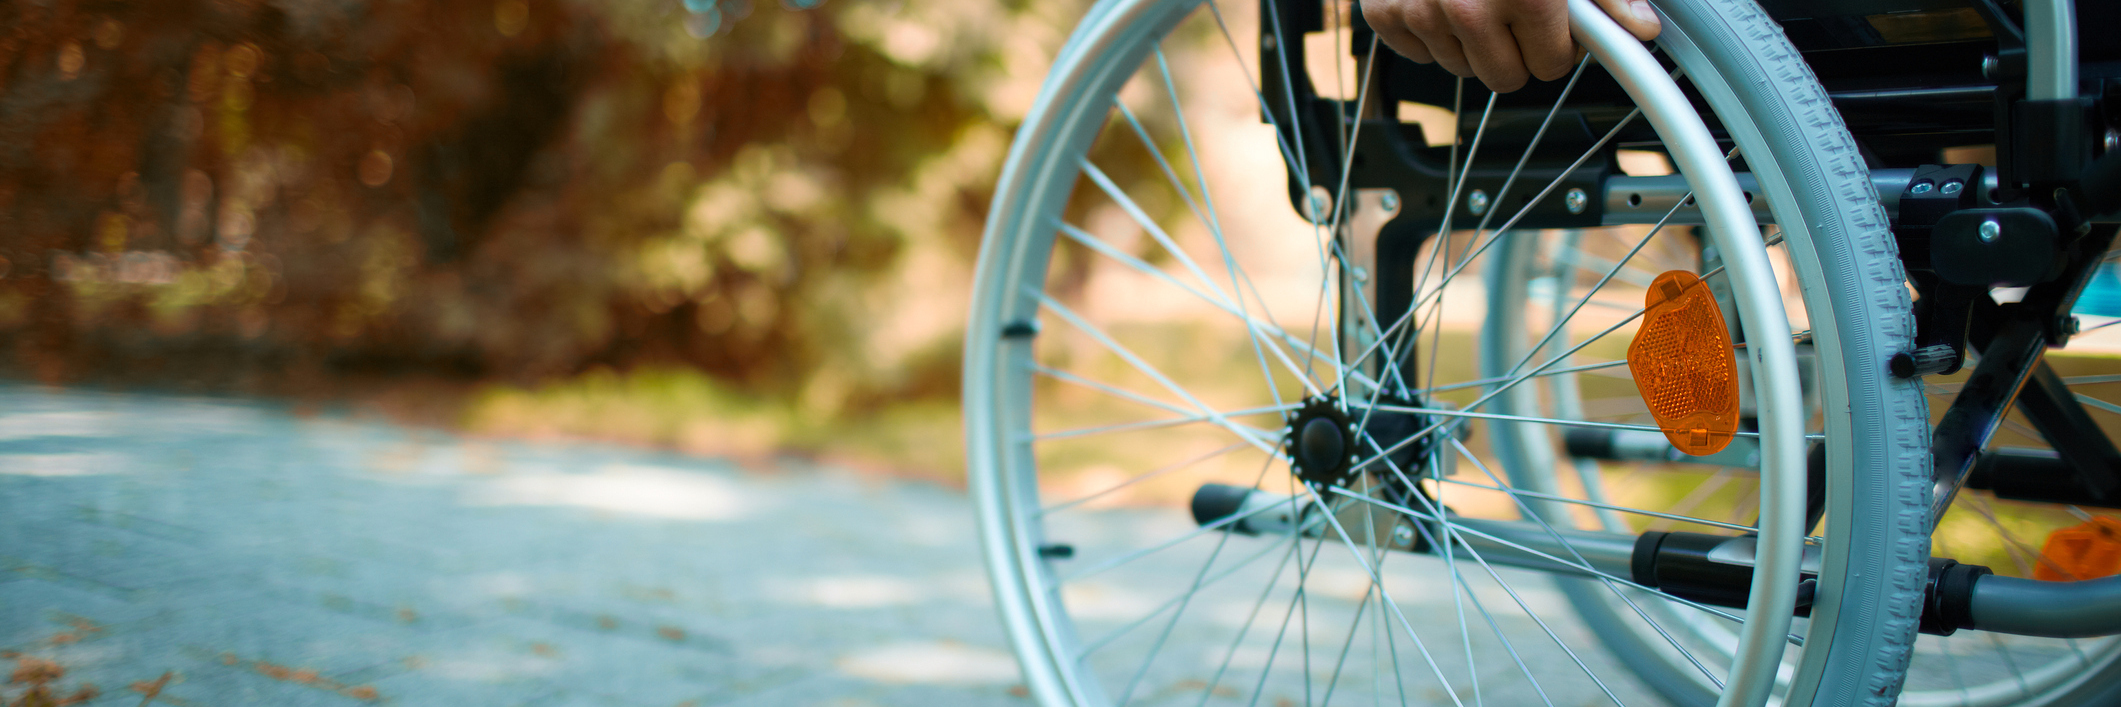 Close-up of male hand on wheel of wheelchair during walk in park.